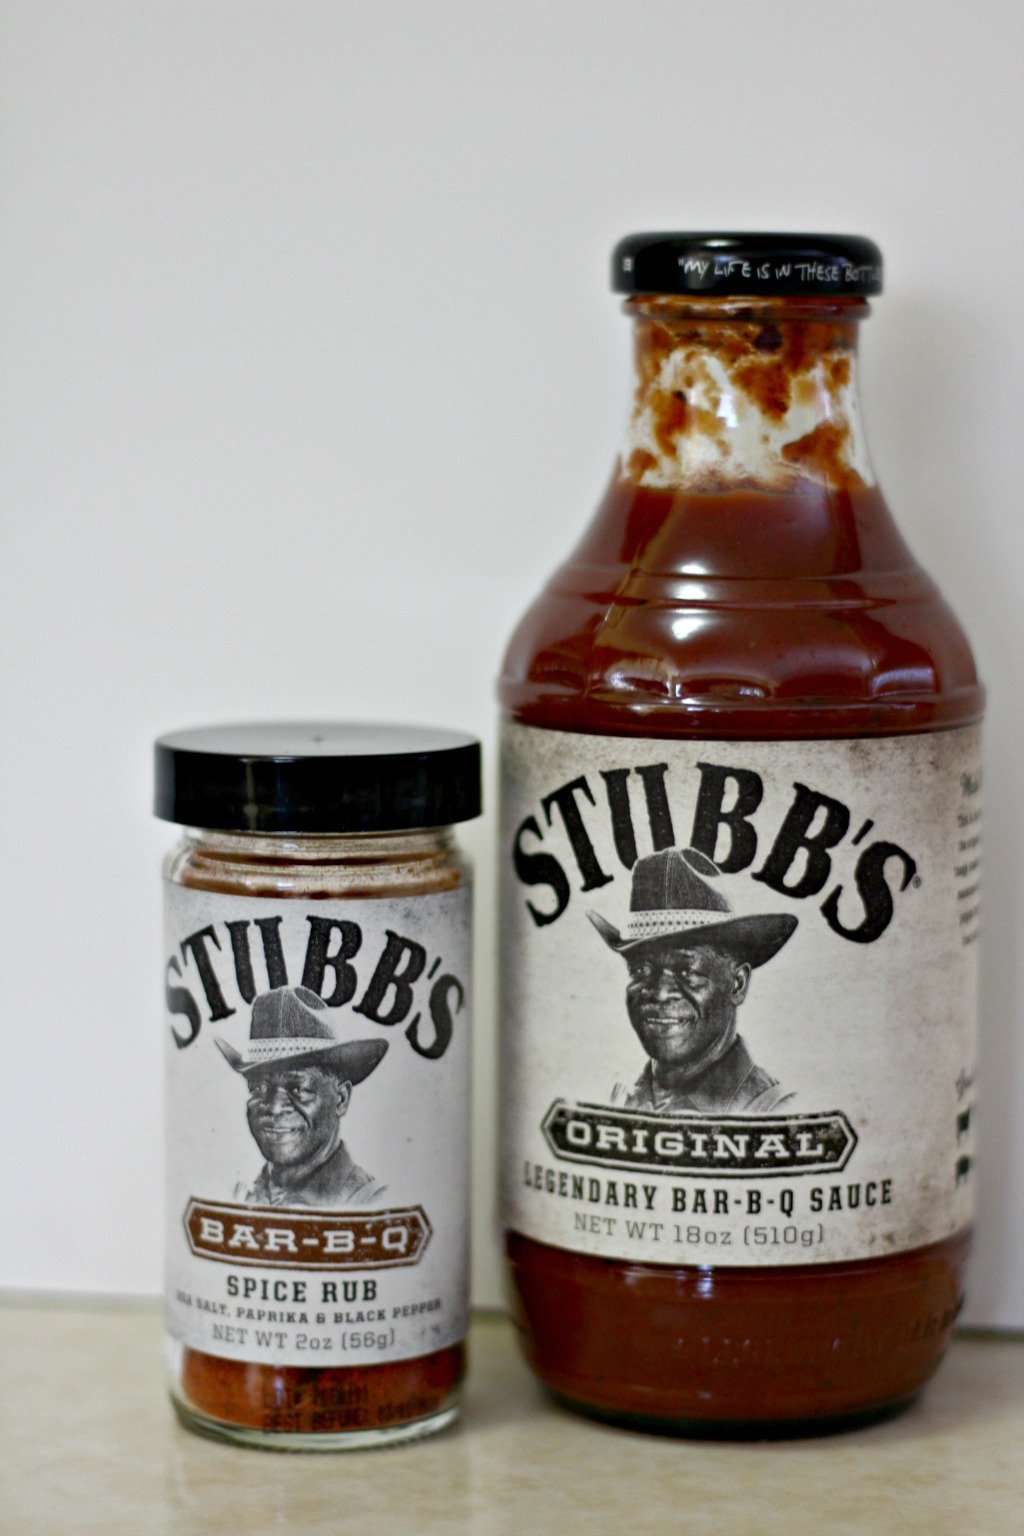 Celebrate Memorial Day with Stubb's BBQ Sauce and Spice Rub